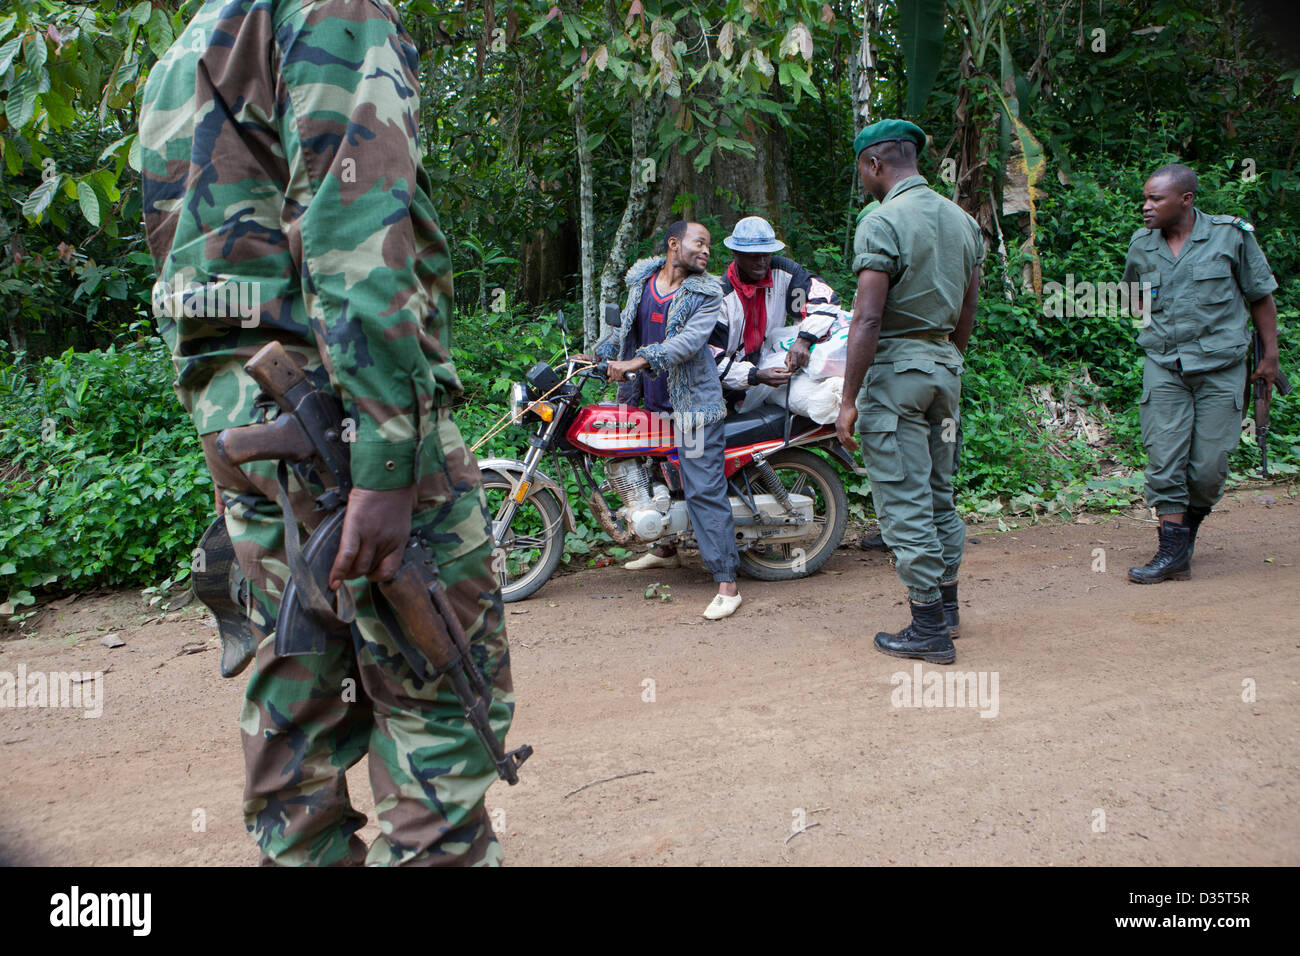 CONGO, 29th Sept 2012: Ecoguards patrol an area of forest down a logging trail.  No animal hunting is allowed in this area. They check a passing motobike for bushmeat or ivory.  Photograph by Mike Goldwater Stock Photo